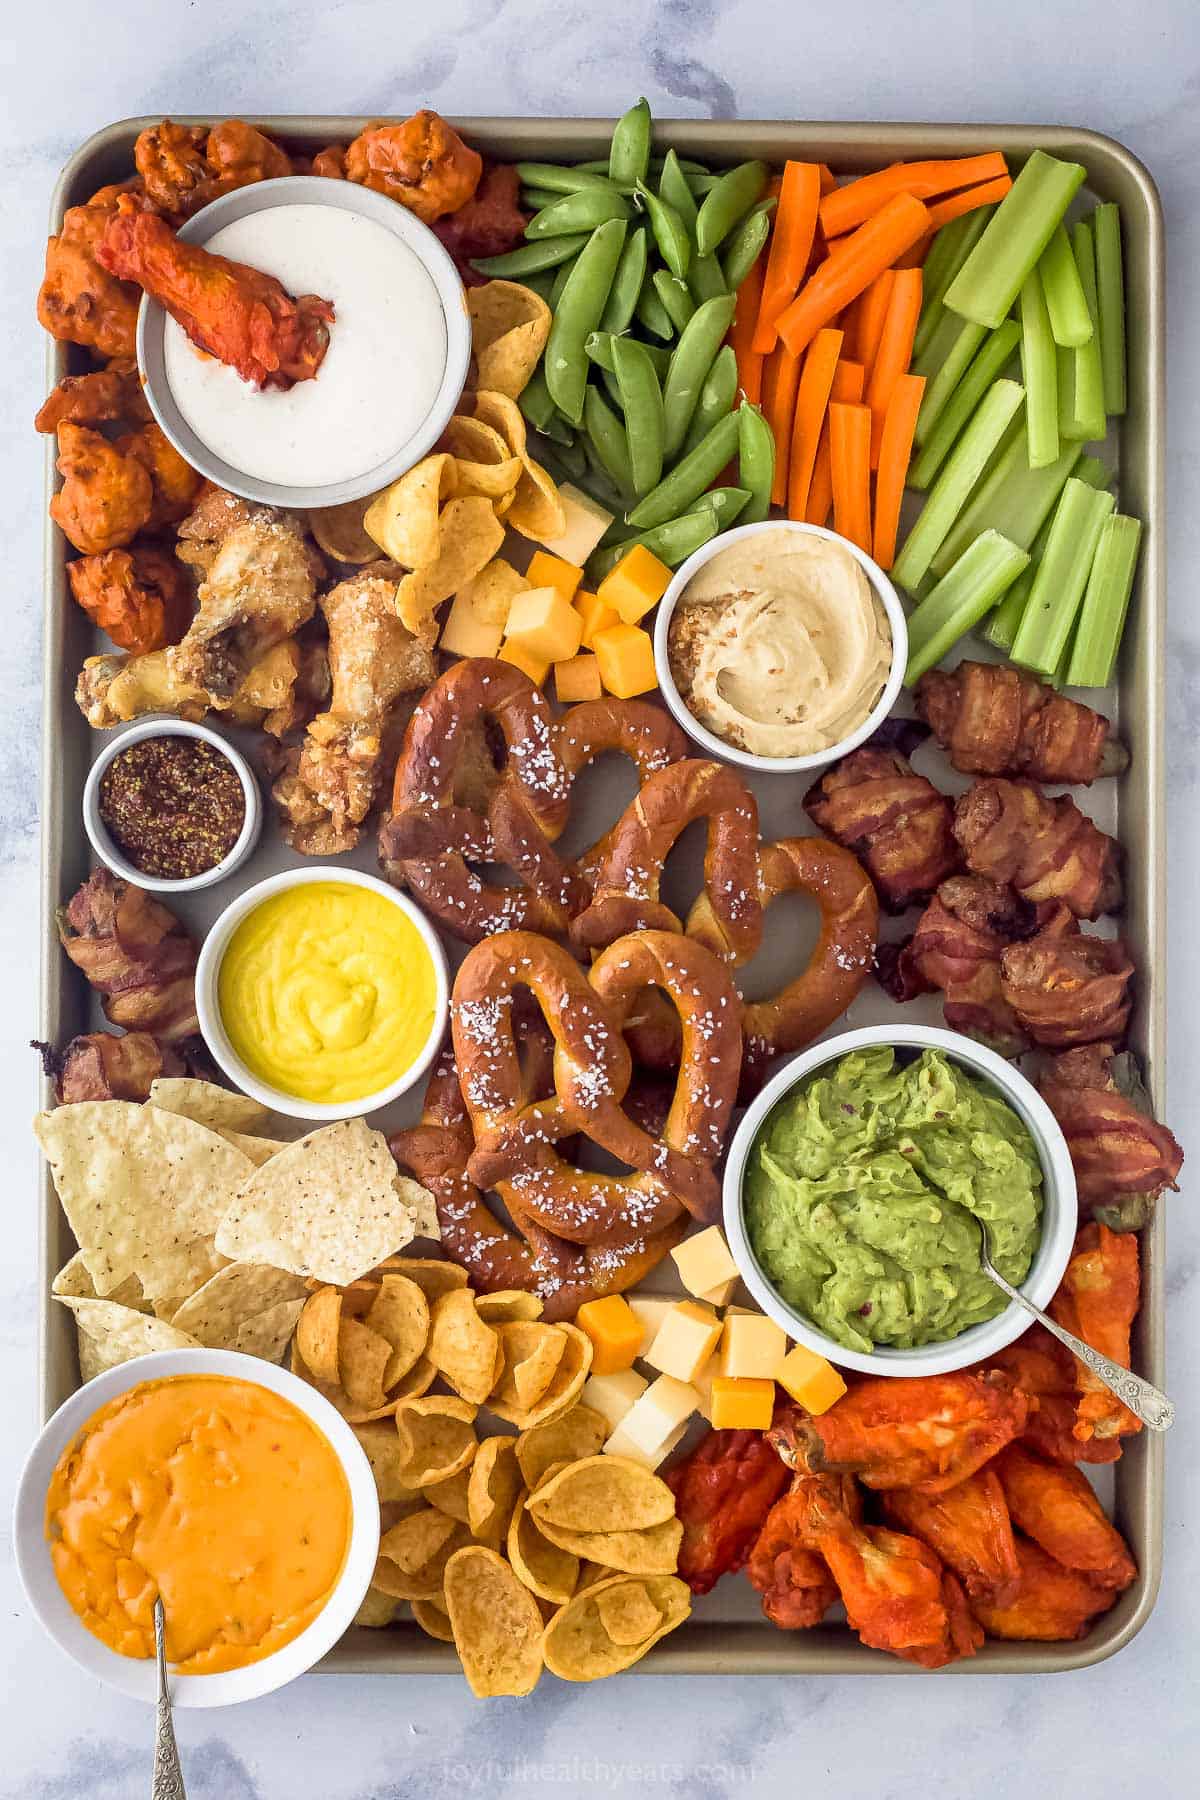 an ،ortment of snack foods on a tray like pretzels, chicken wings, cheese, veggie sticks, and tortilla chips ،tered around dips like guacamole, mus،, and ranch